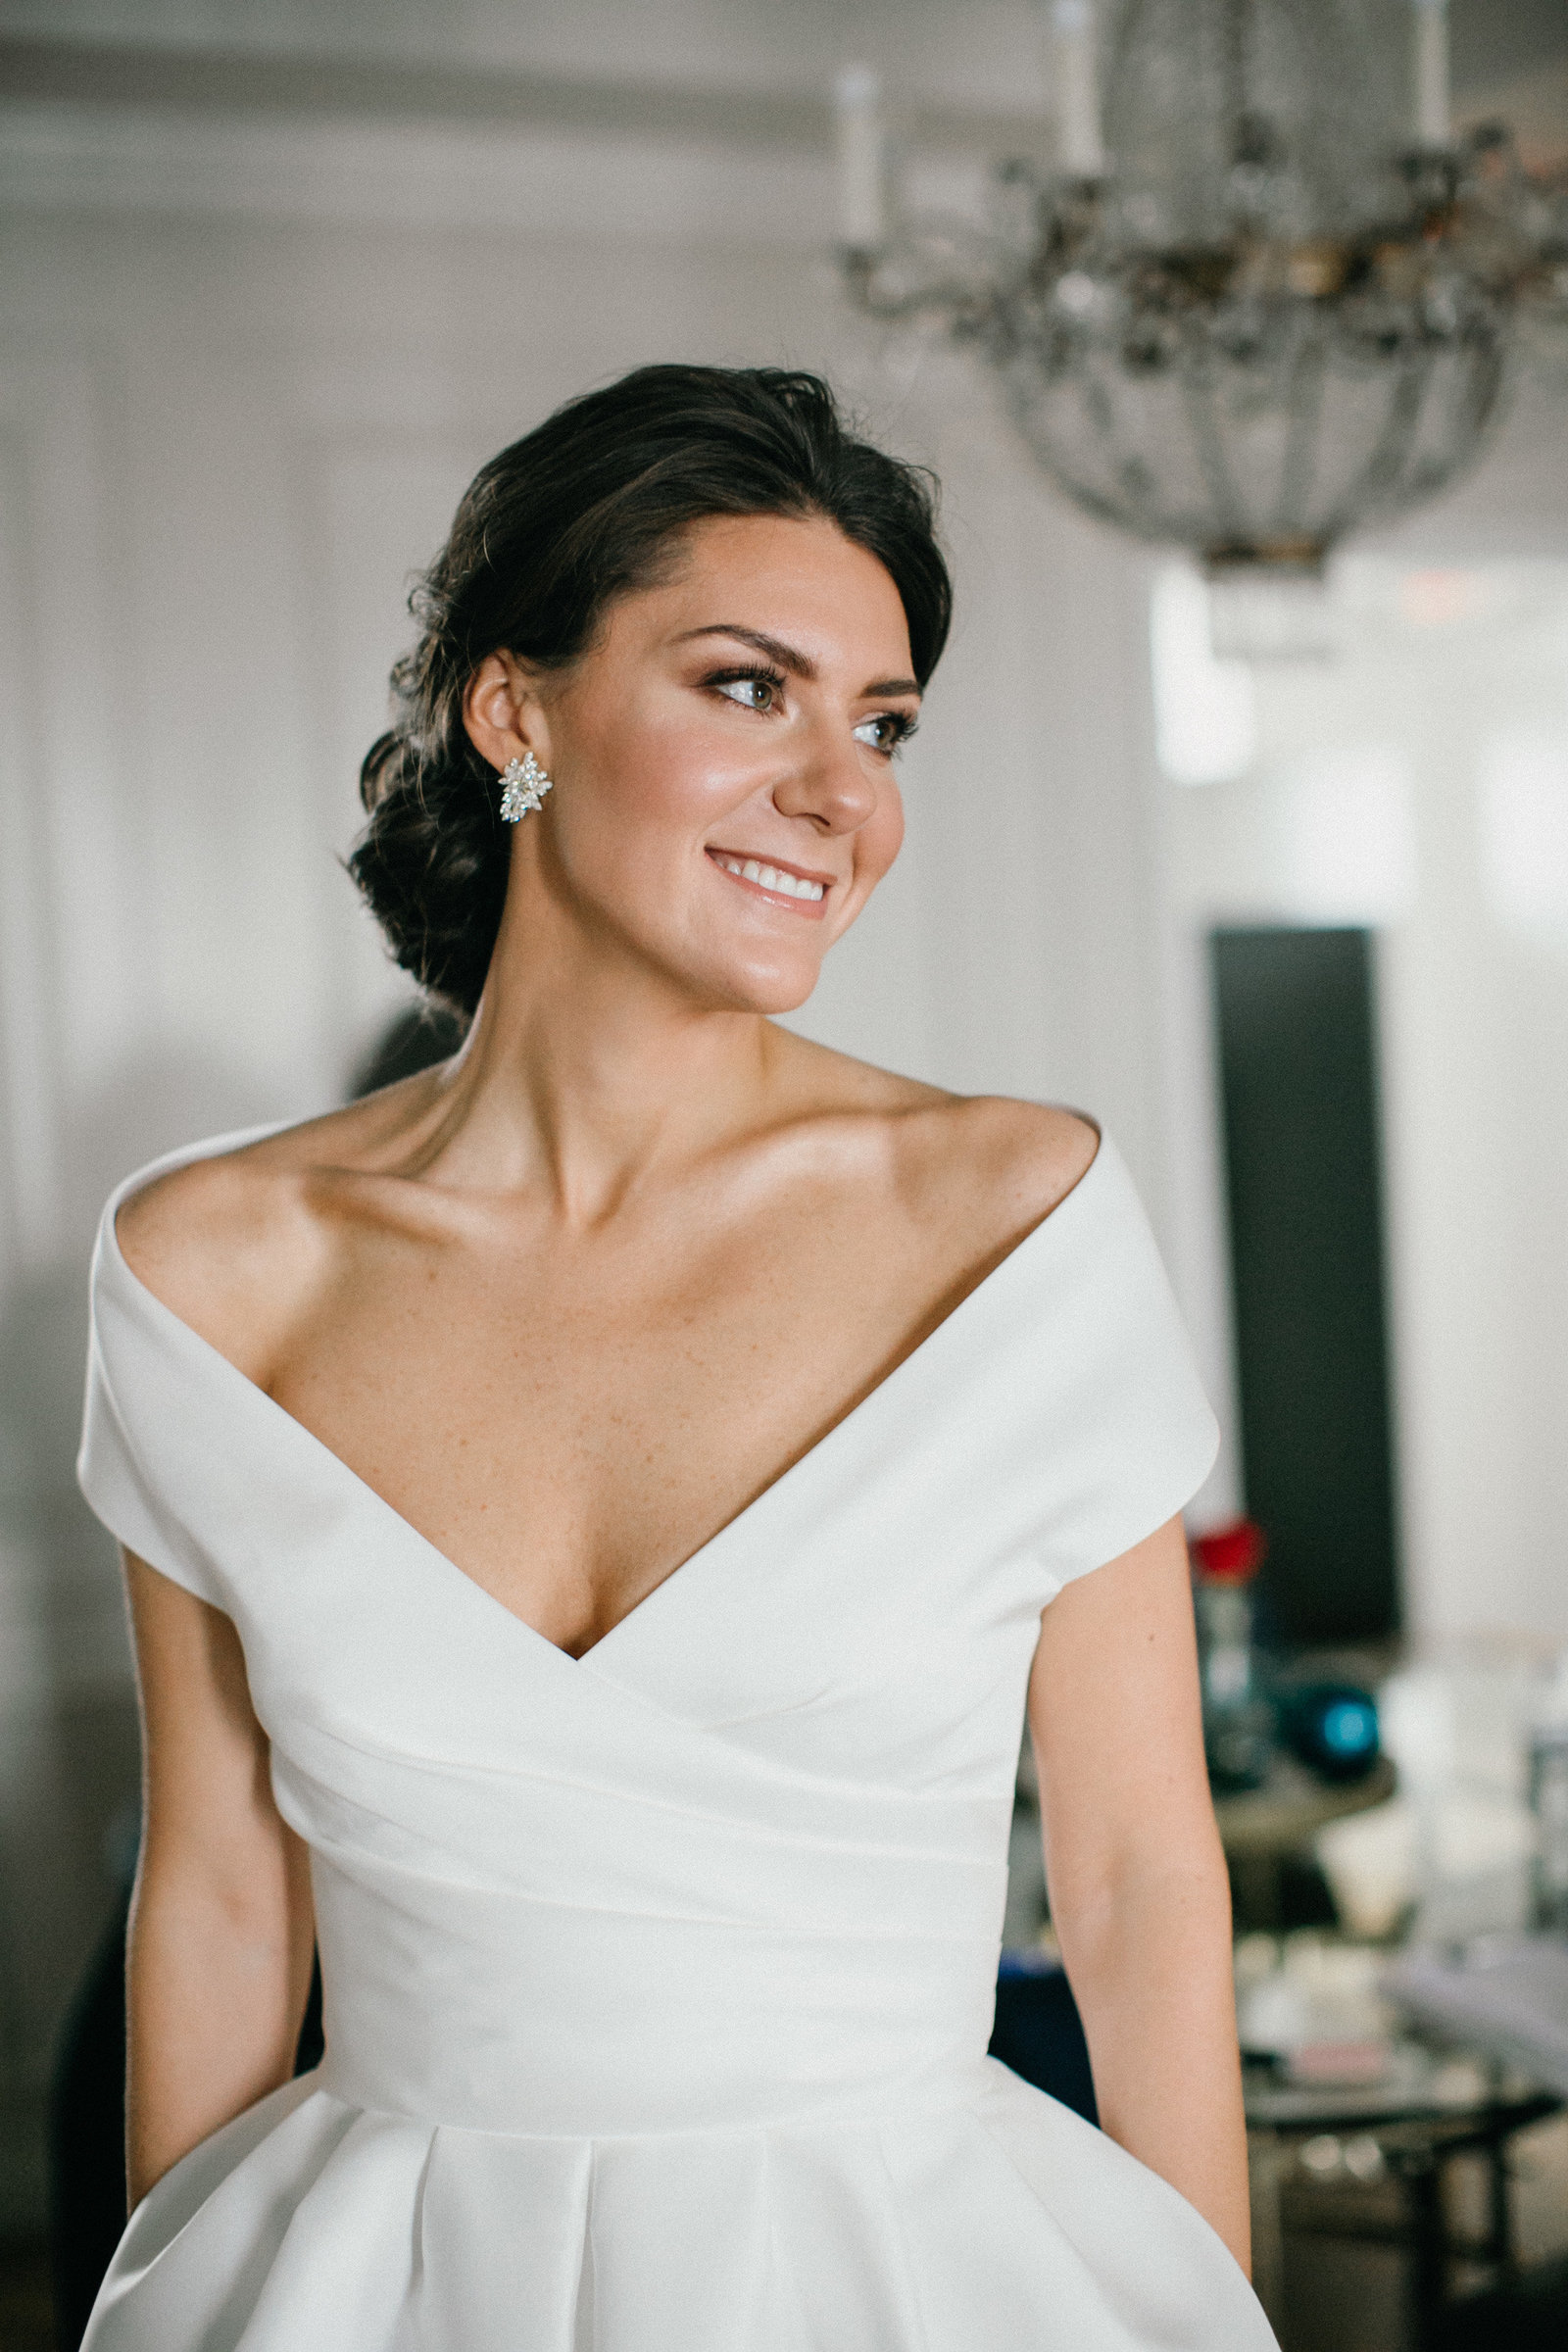 Our bride photographed getting ready at Philadelphia's Ritz Carlton wearing a  gorgeous Le spose di Gio bridal gown.